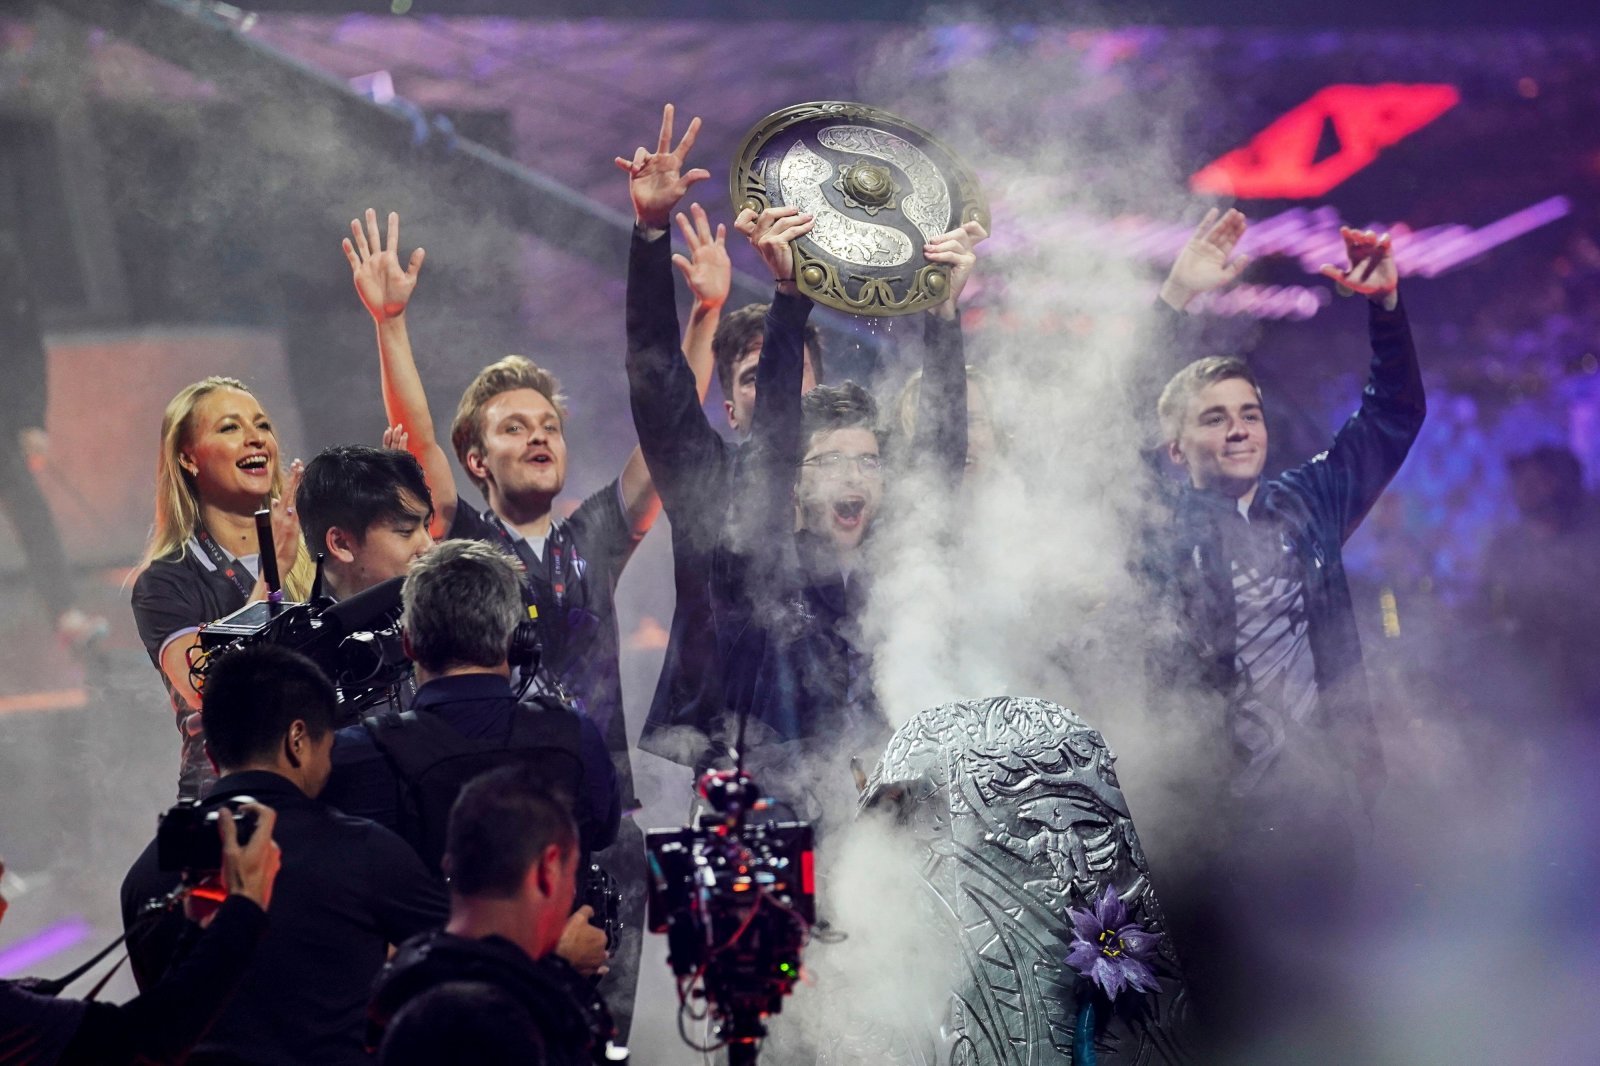 Sebastien "Ceb" Debs (C) of team OG holds the winner's trophy as the team wins the Dota 2 eSports Best of 5 final match during the International Dota 2 Championships in Shanghai on August 25, 2019. (Photo by STR / AFP) / China OUT        (Photo credit should read STR/AFP/Getty Images)